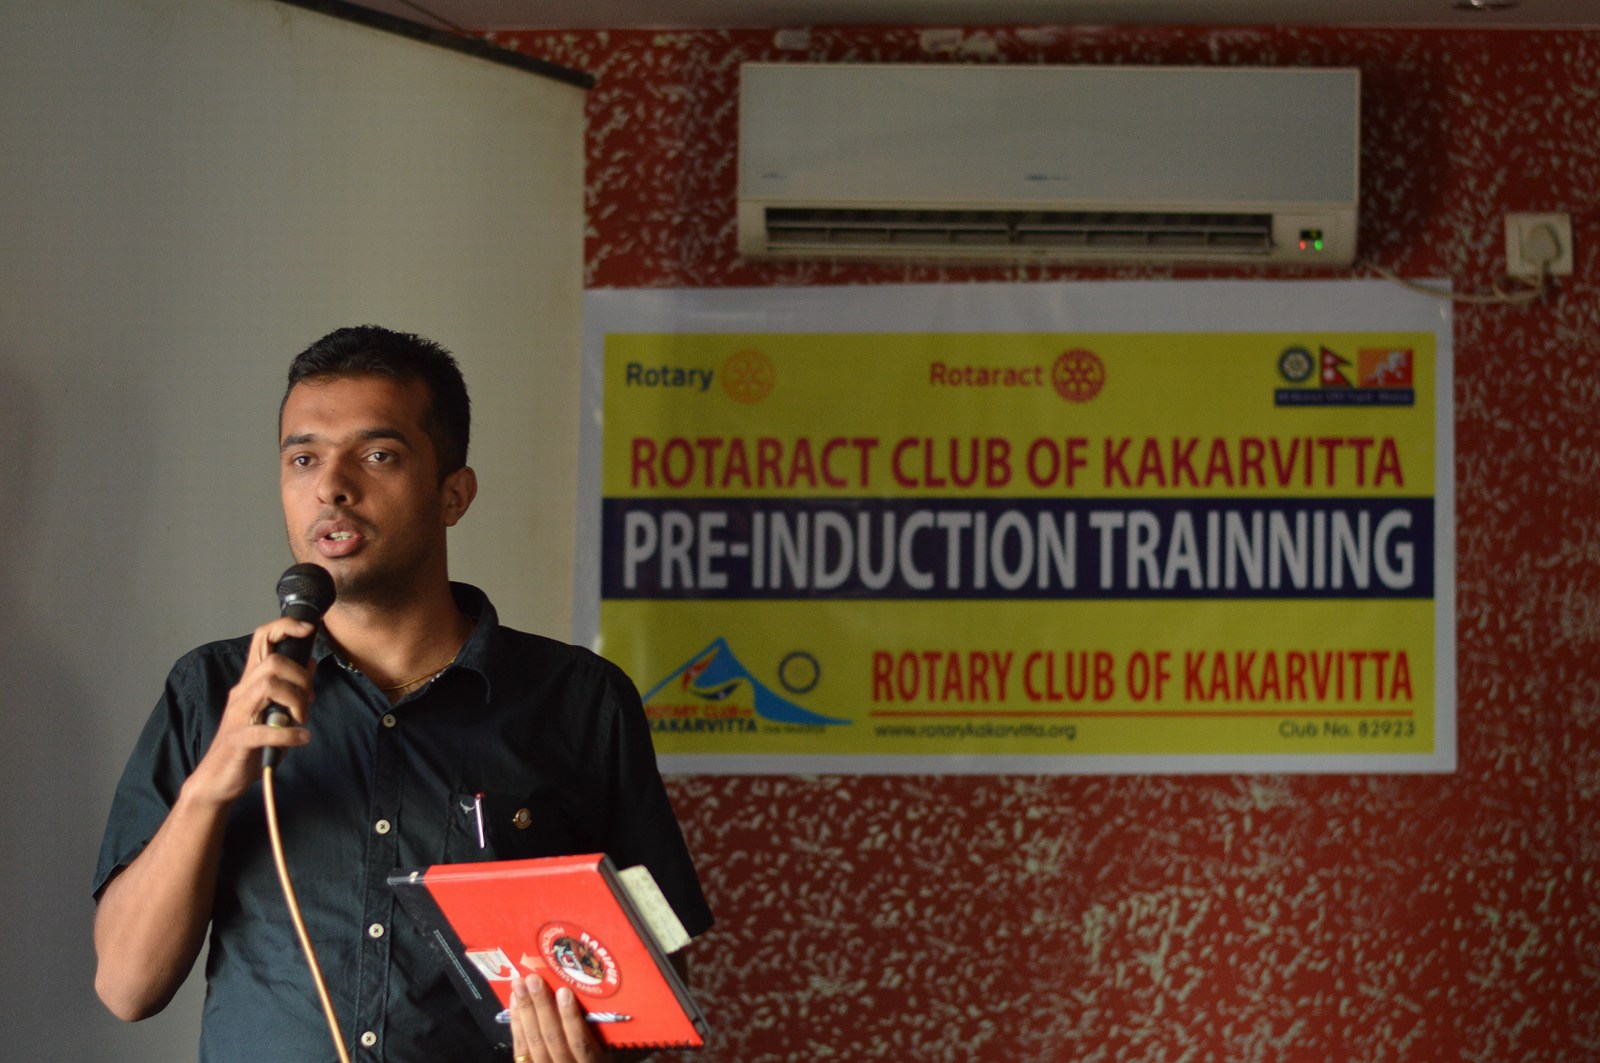 Pre-Induction-Training-of-Rotaract-Club-of-Kakarvitta-Rotary-Club-of-Kakarvitta-12